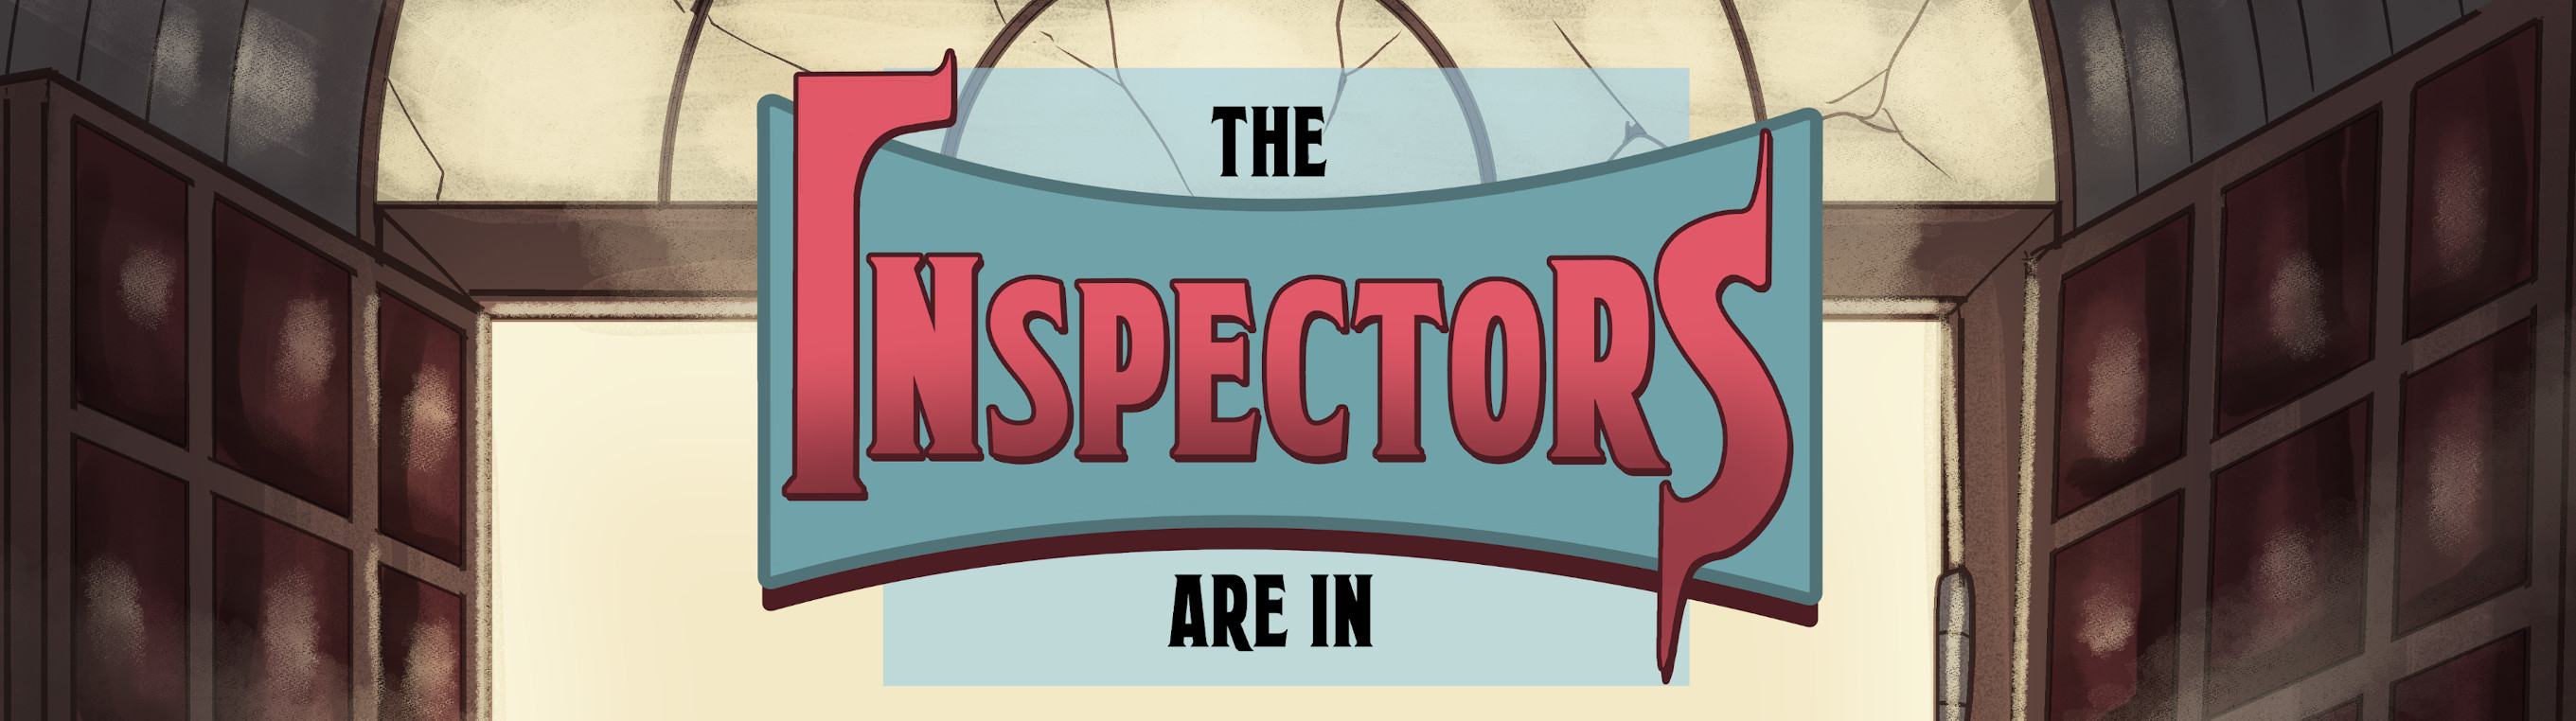 The Inspectors Are In